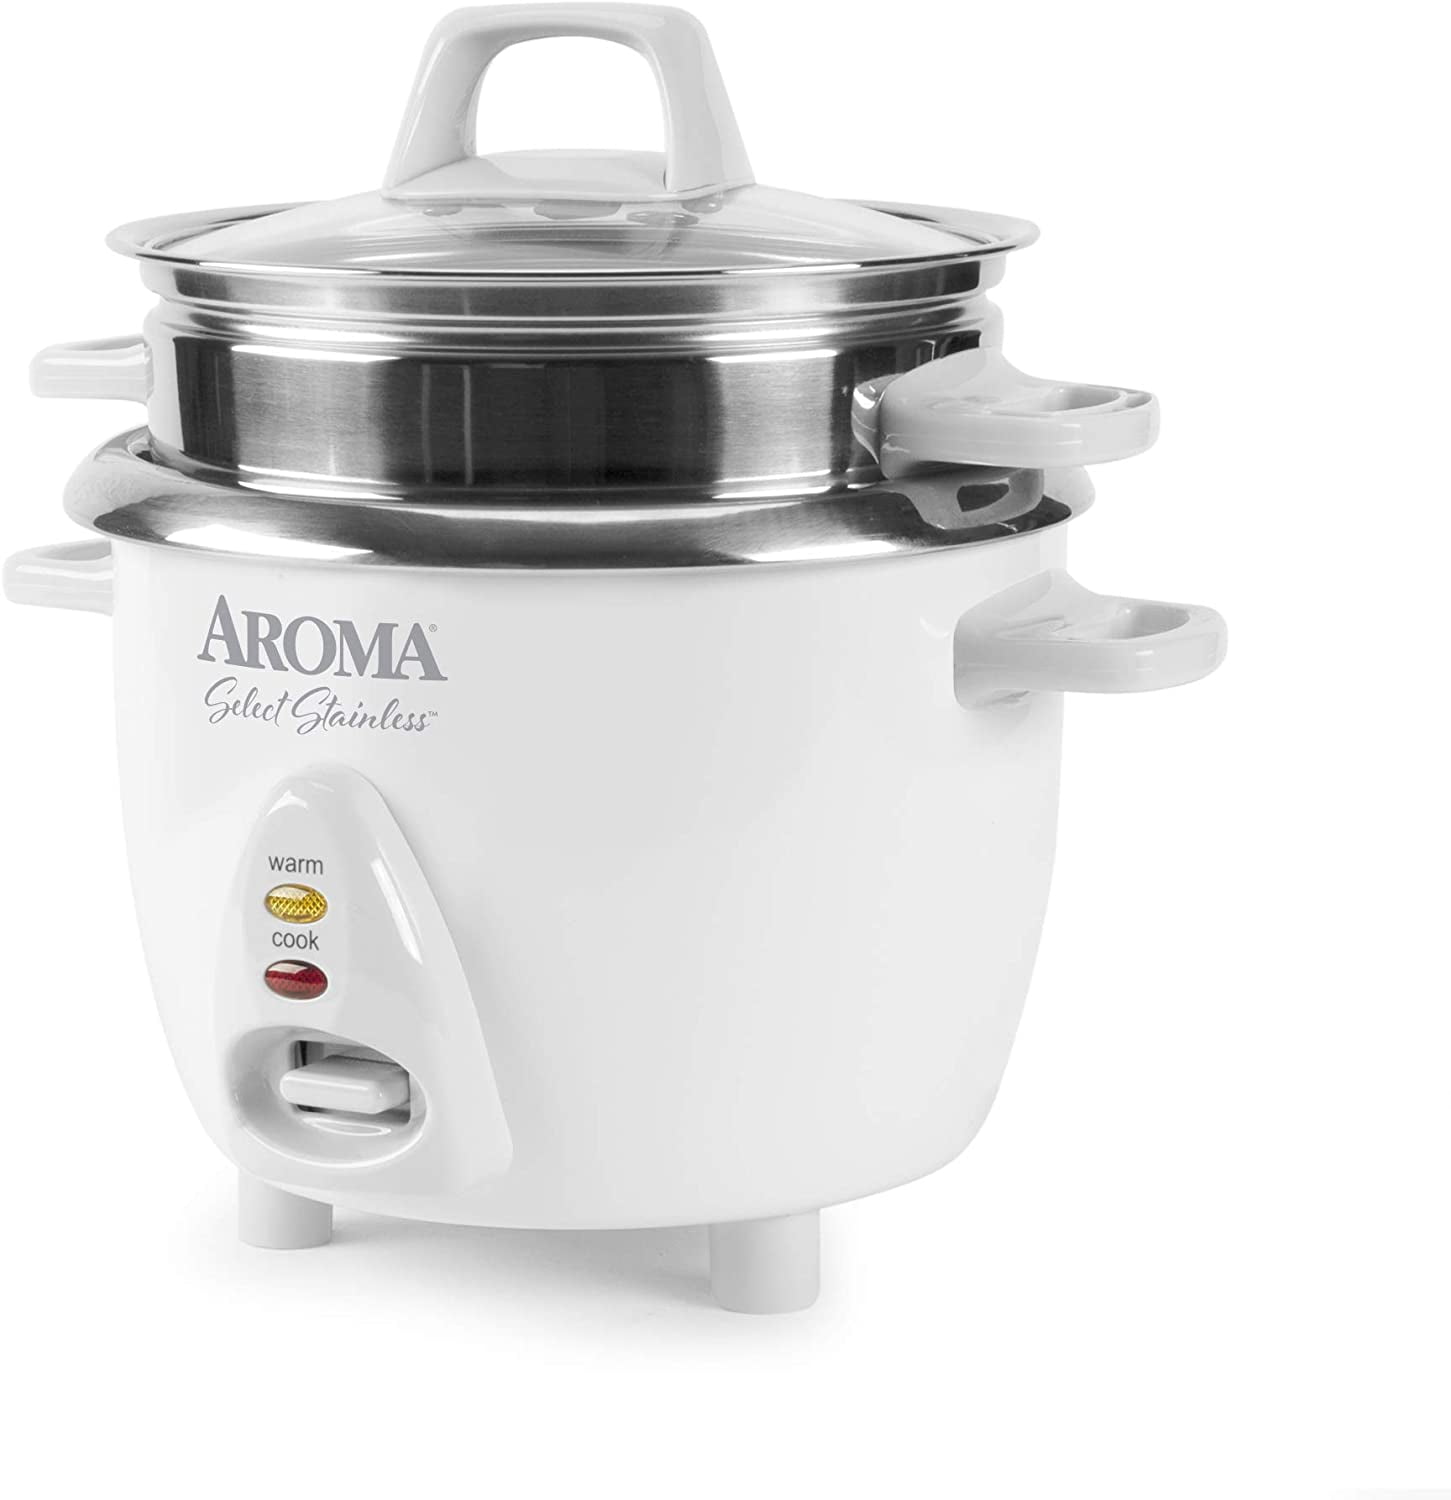 Aroma Housewares 6-Cup (Cooked) (3-Cup Uncooked) Pot Style Rice Cooker and  Food Steamer (ARC-743-1NG), White by Aroma at Fleet Farm